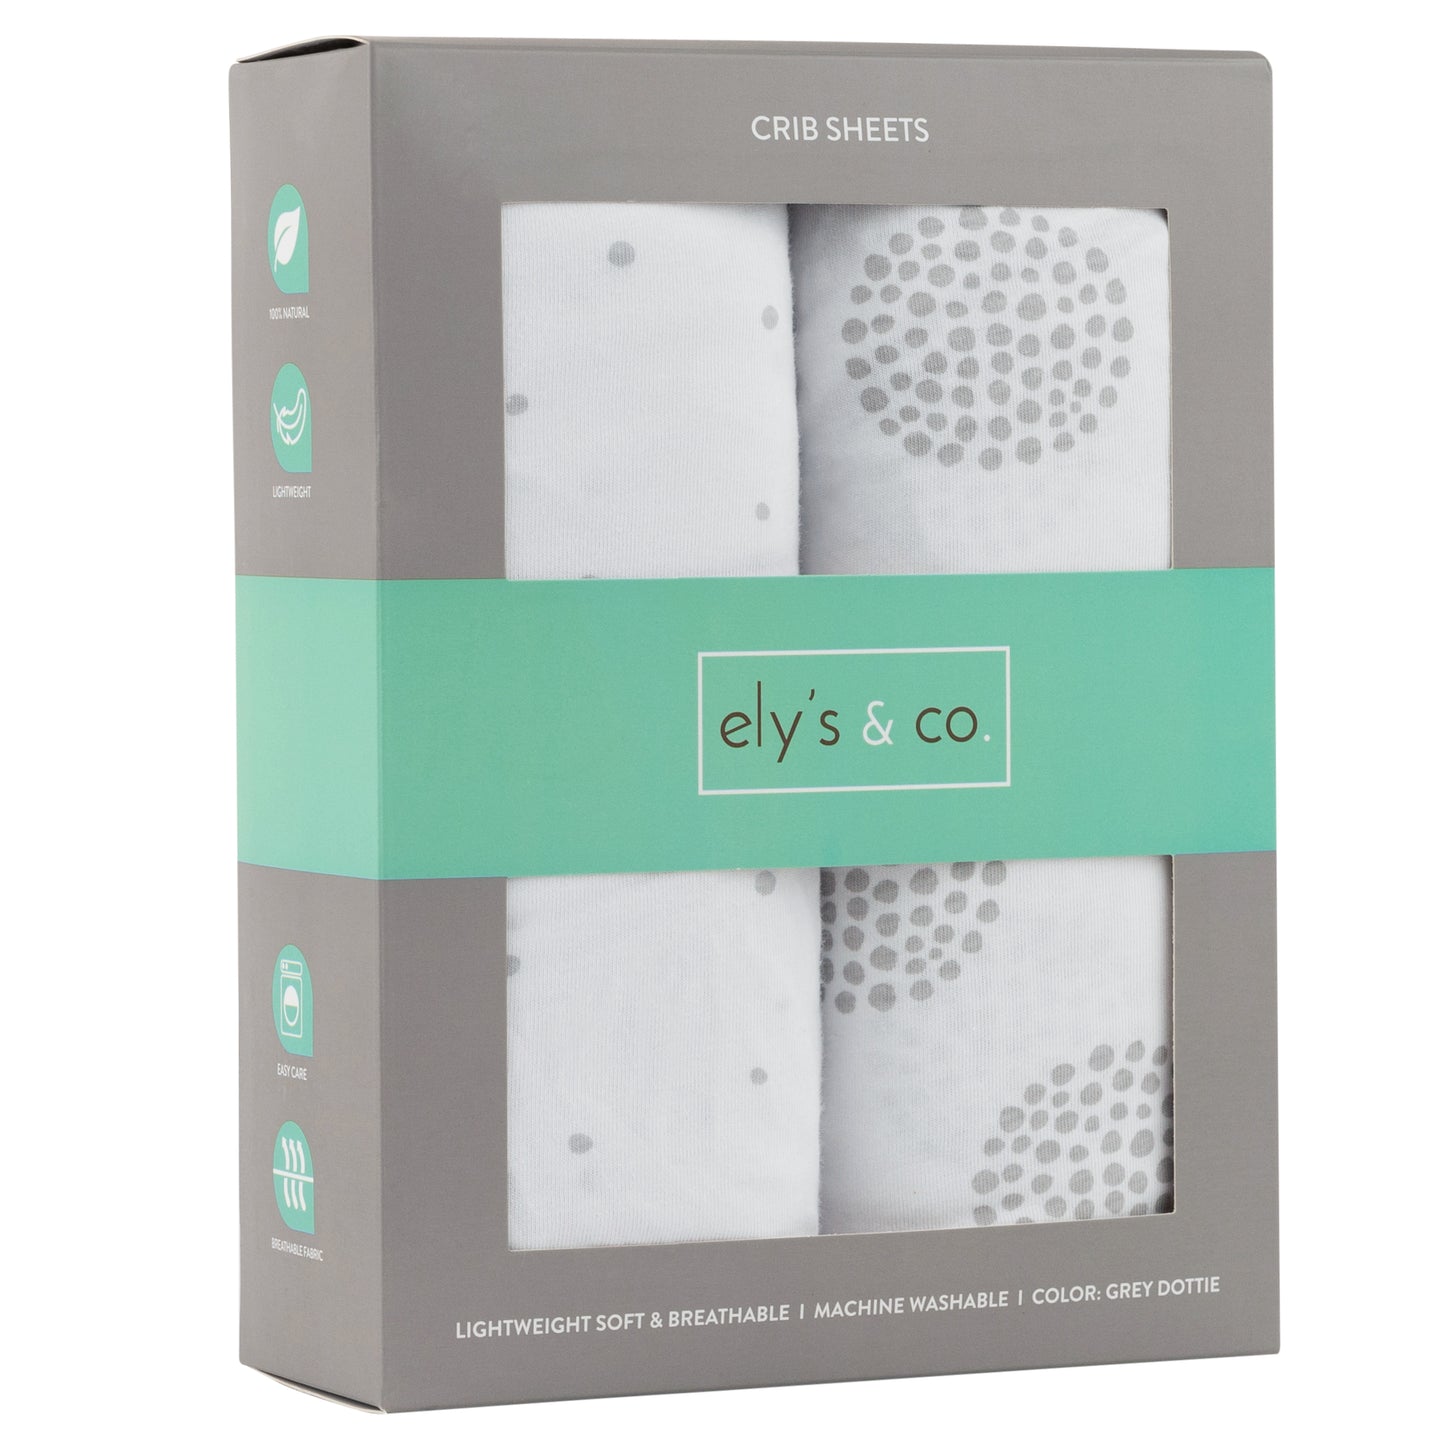 Ely's & Co. Crib Sheets (2 Pack)